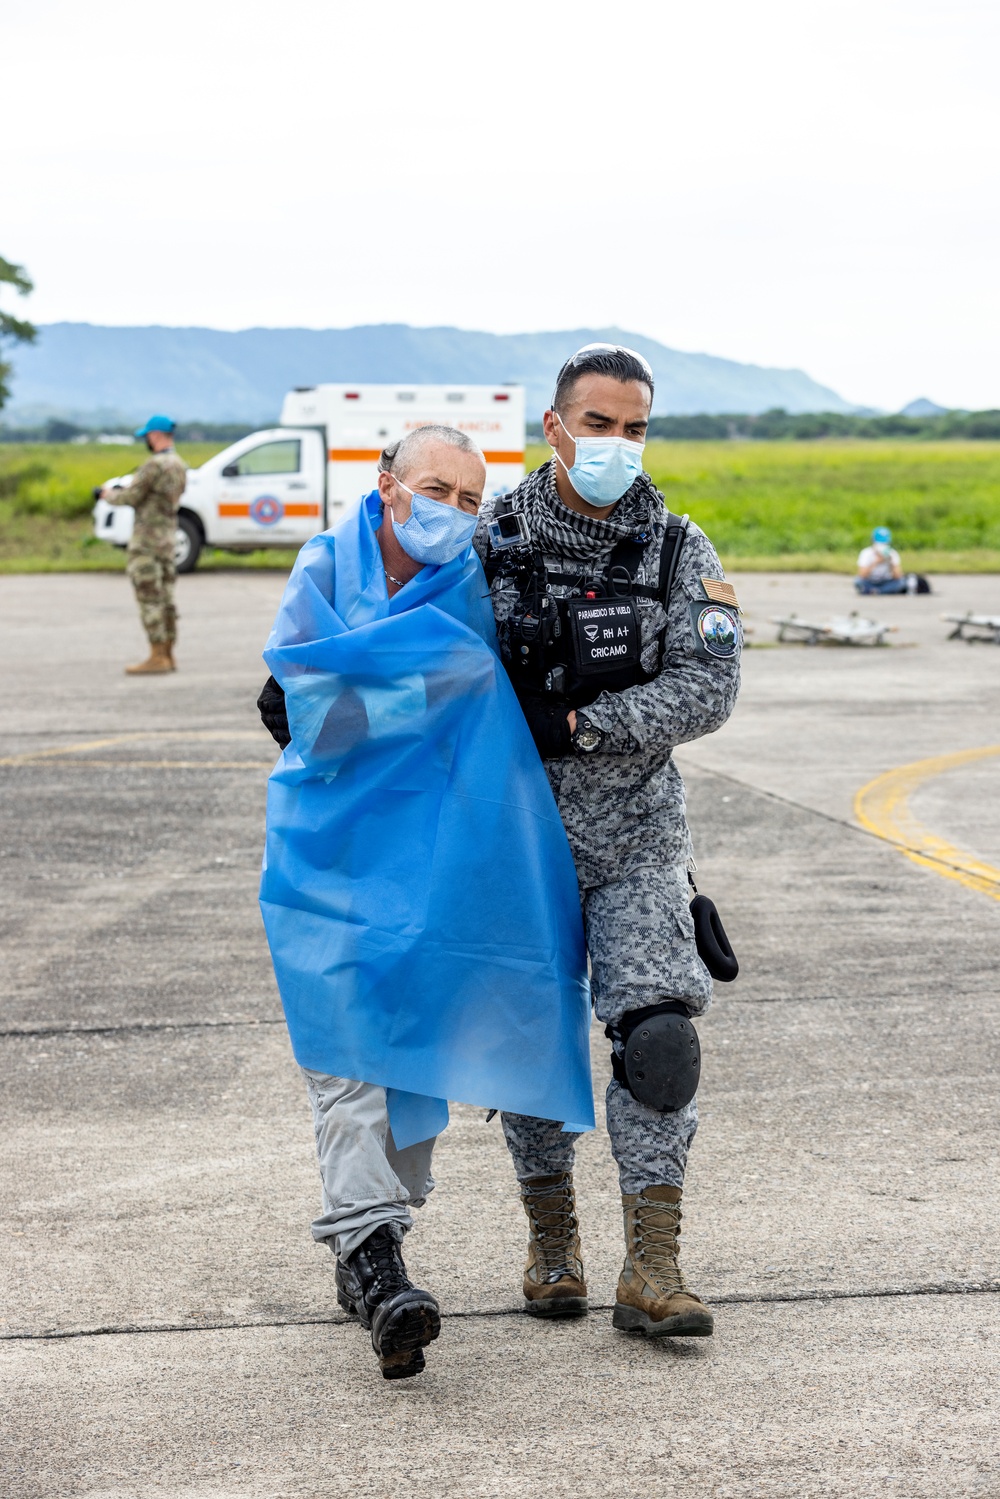 Colombian led exercise Ángel de los Andes medical operations